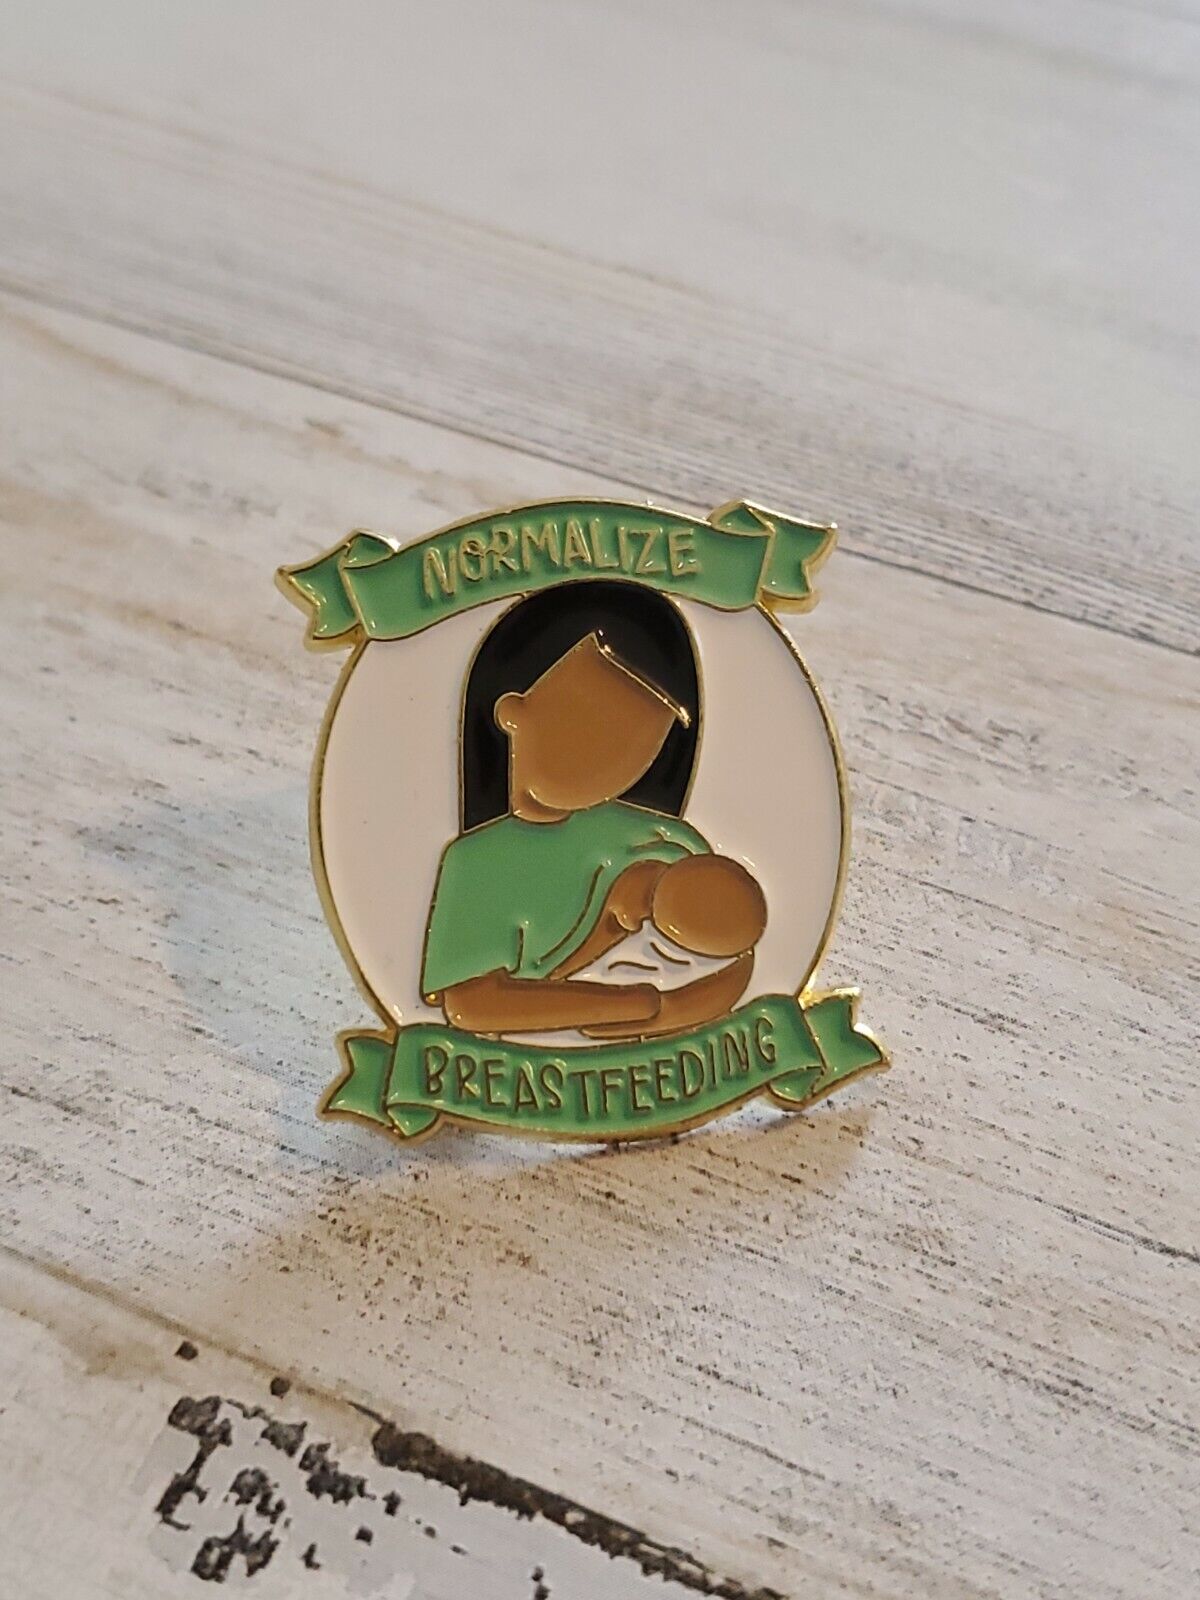 Normalize Breastfeeding Support Lapel Pin Hospital Baby gy